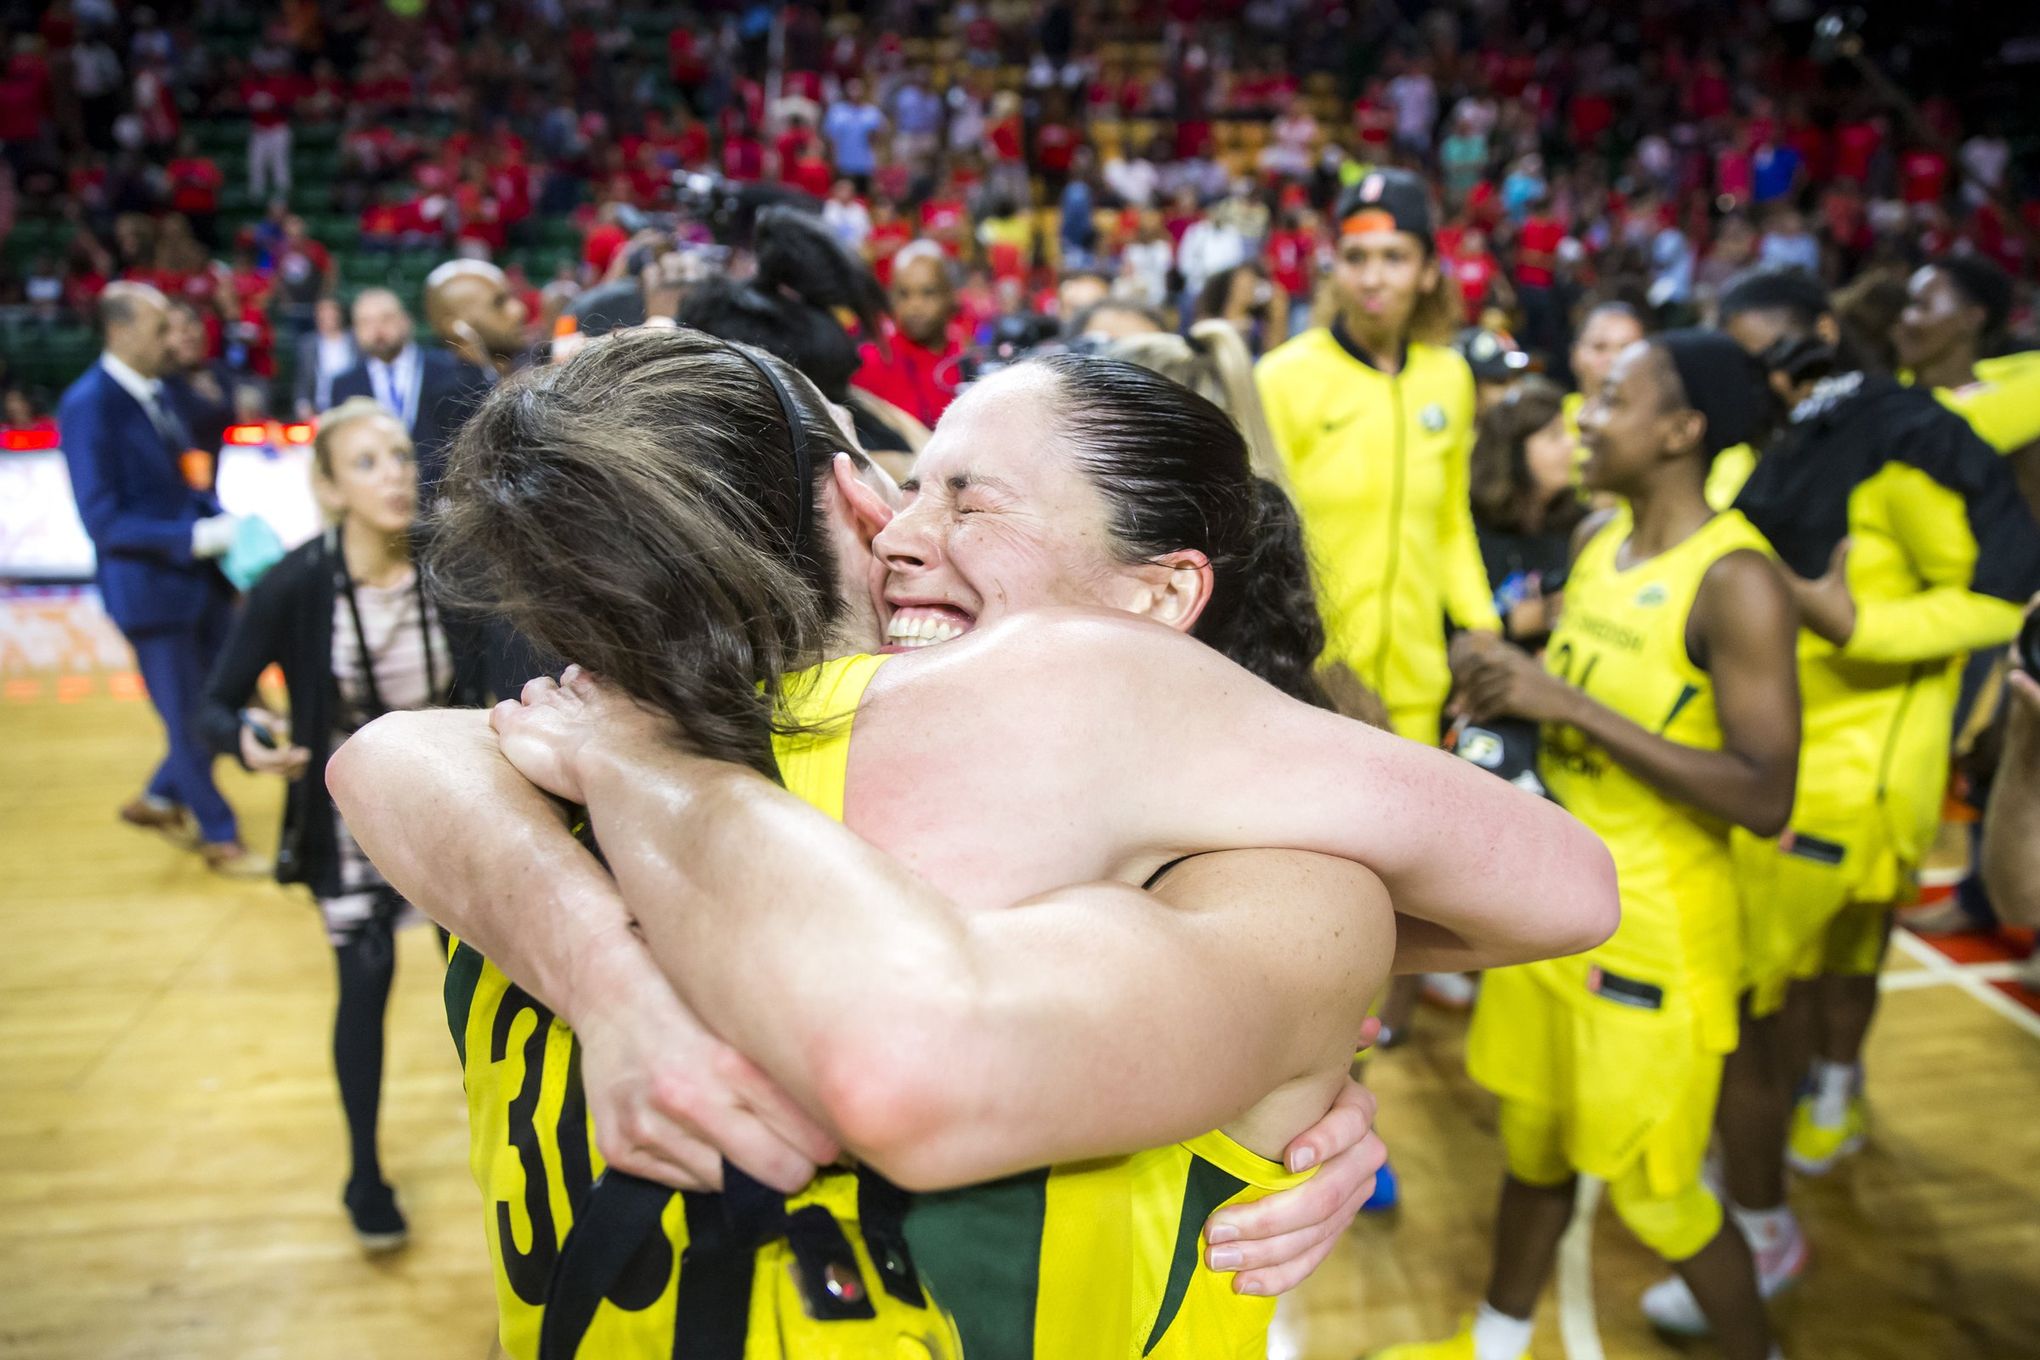 Seattle Storm win second WNBA title in 3 years